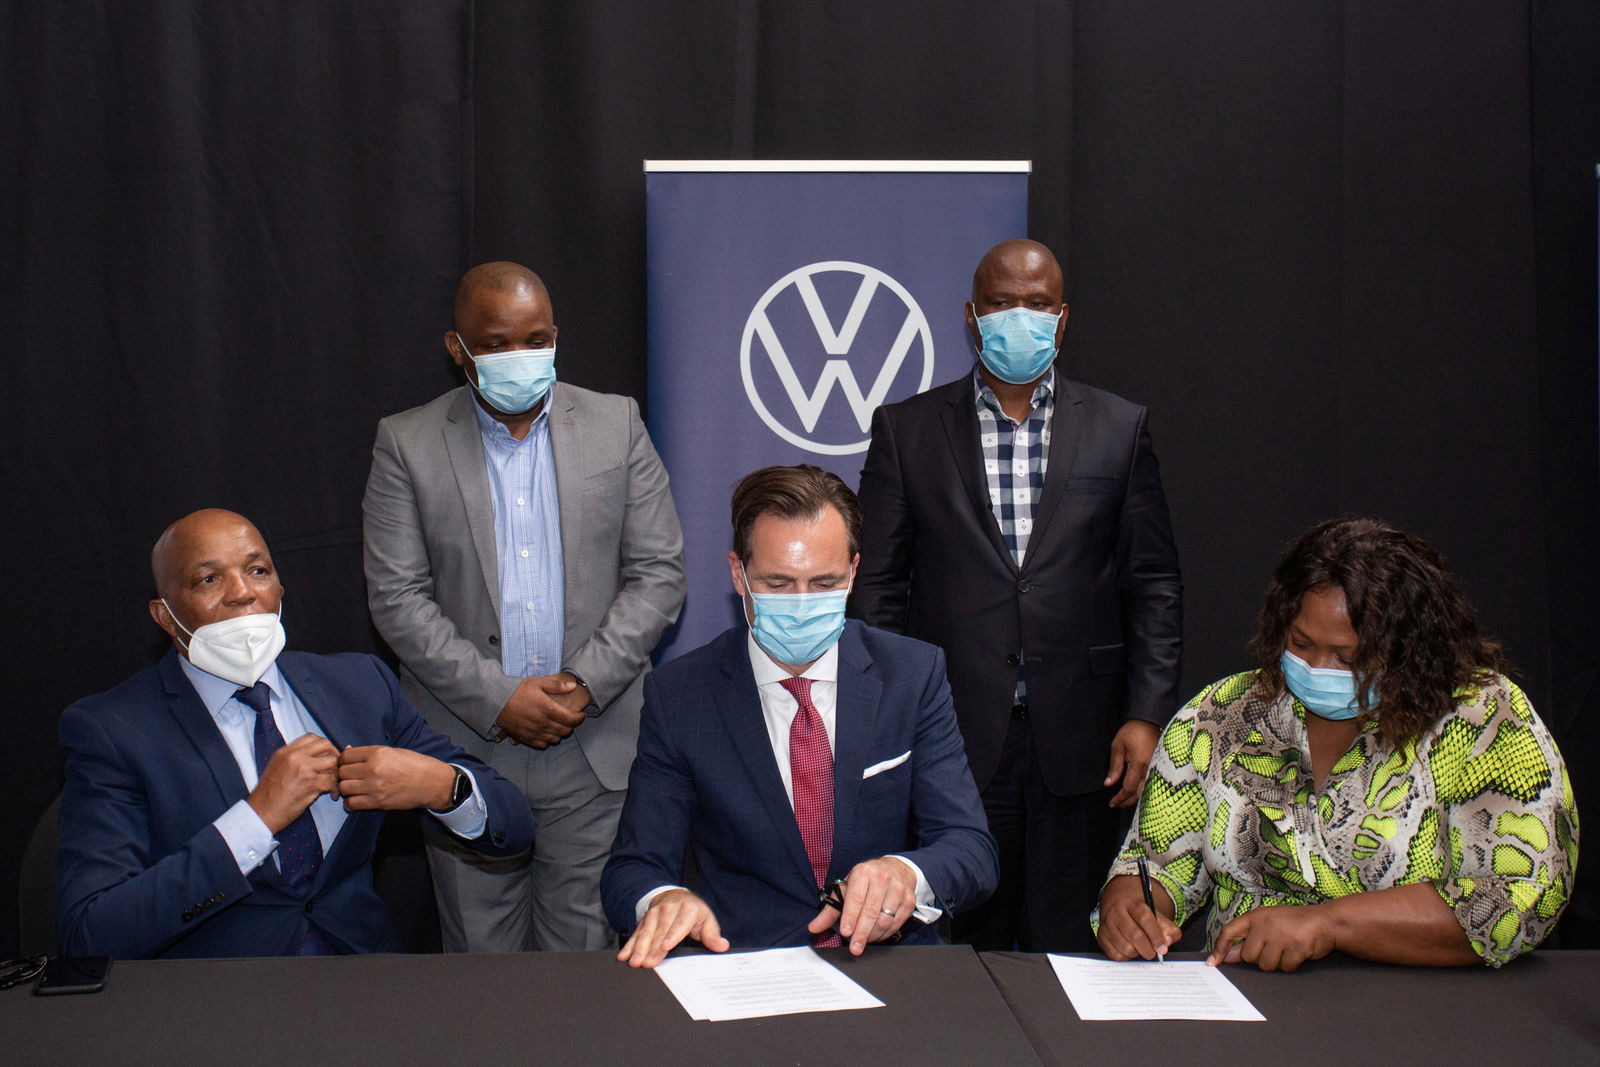 Story: "Volkswagen converts PE Plant into temporary Covid-19 medical facility"